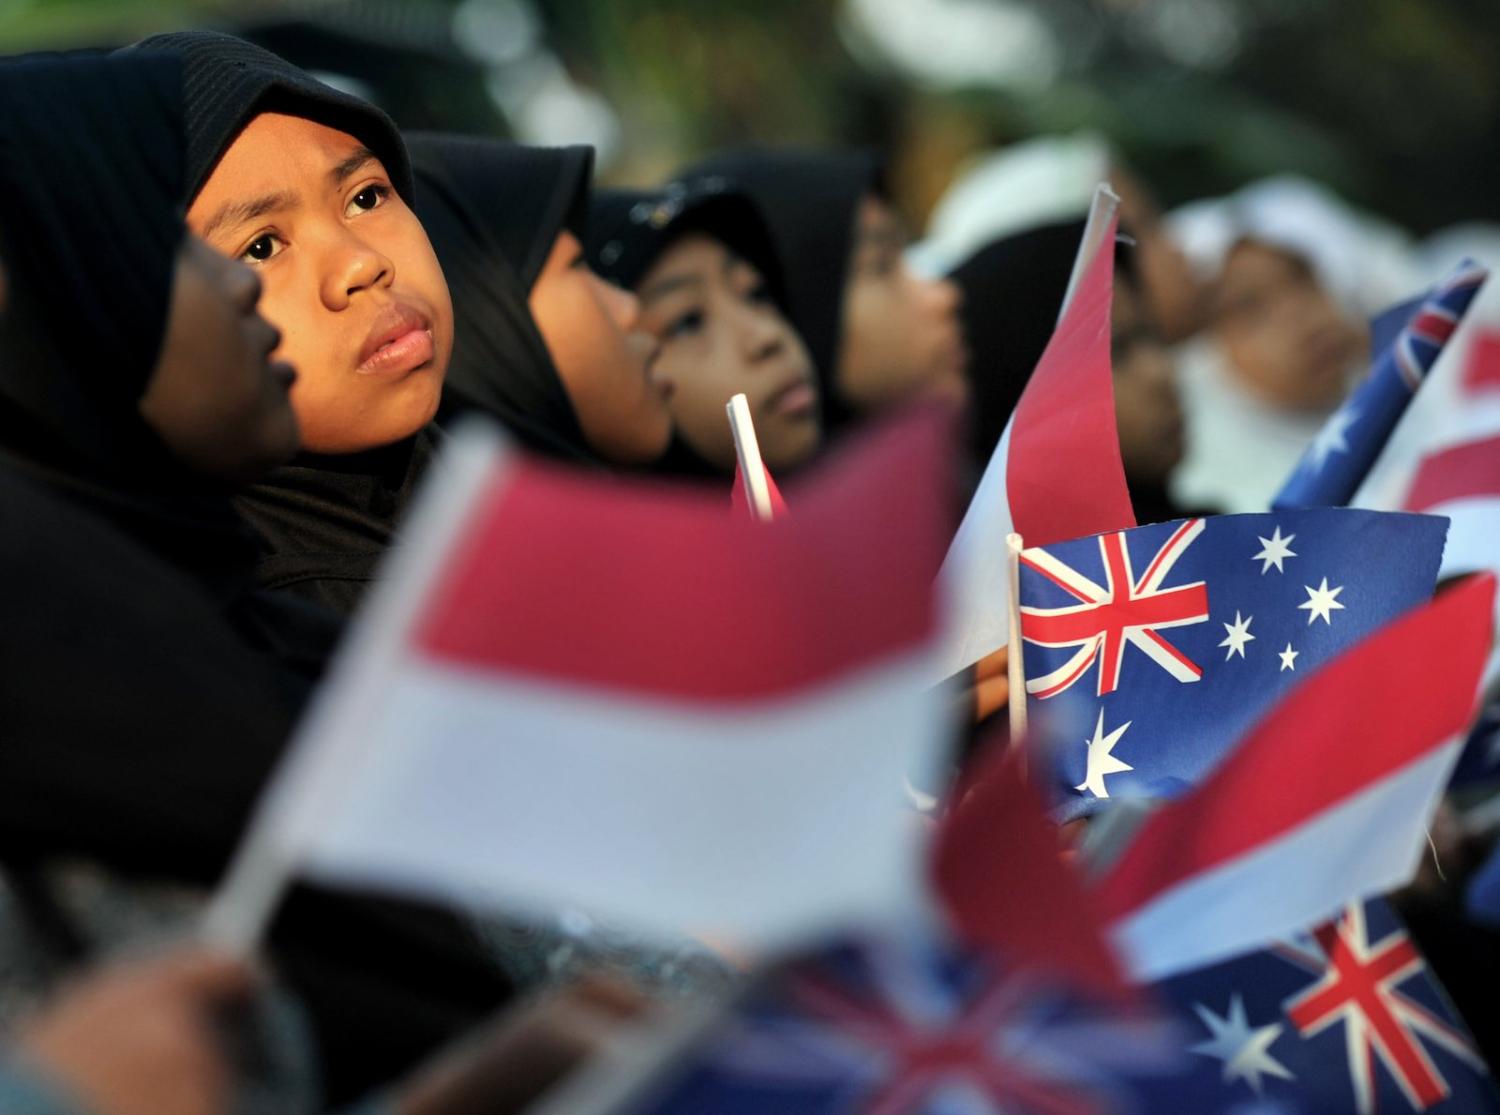 Indonesian language study has been in steady decline in Australia for many years (Photo: Bay Ismoyo via Getty)